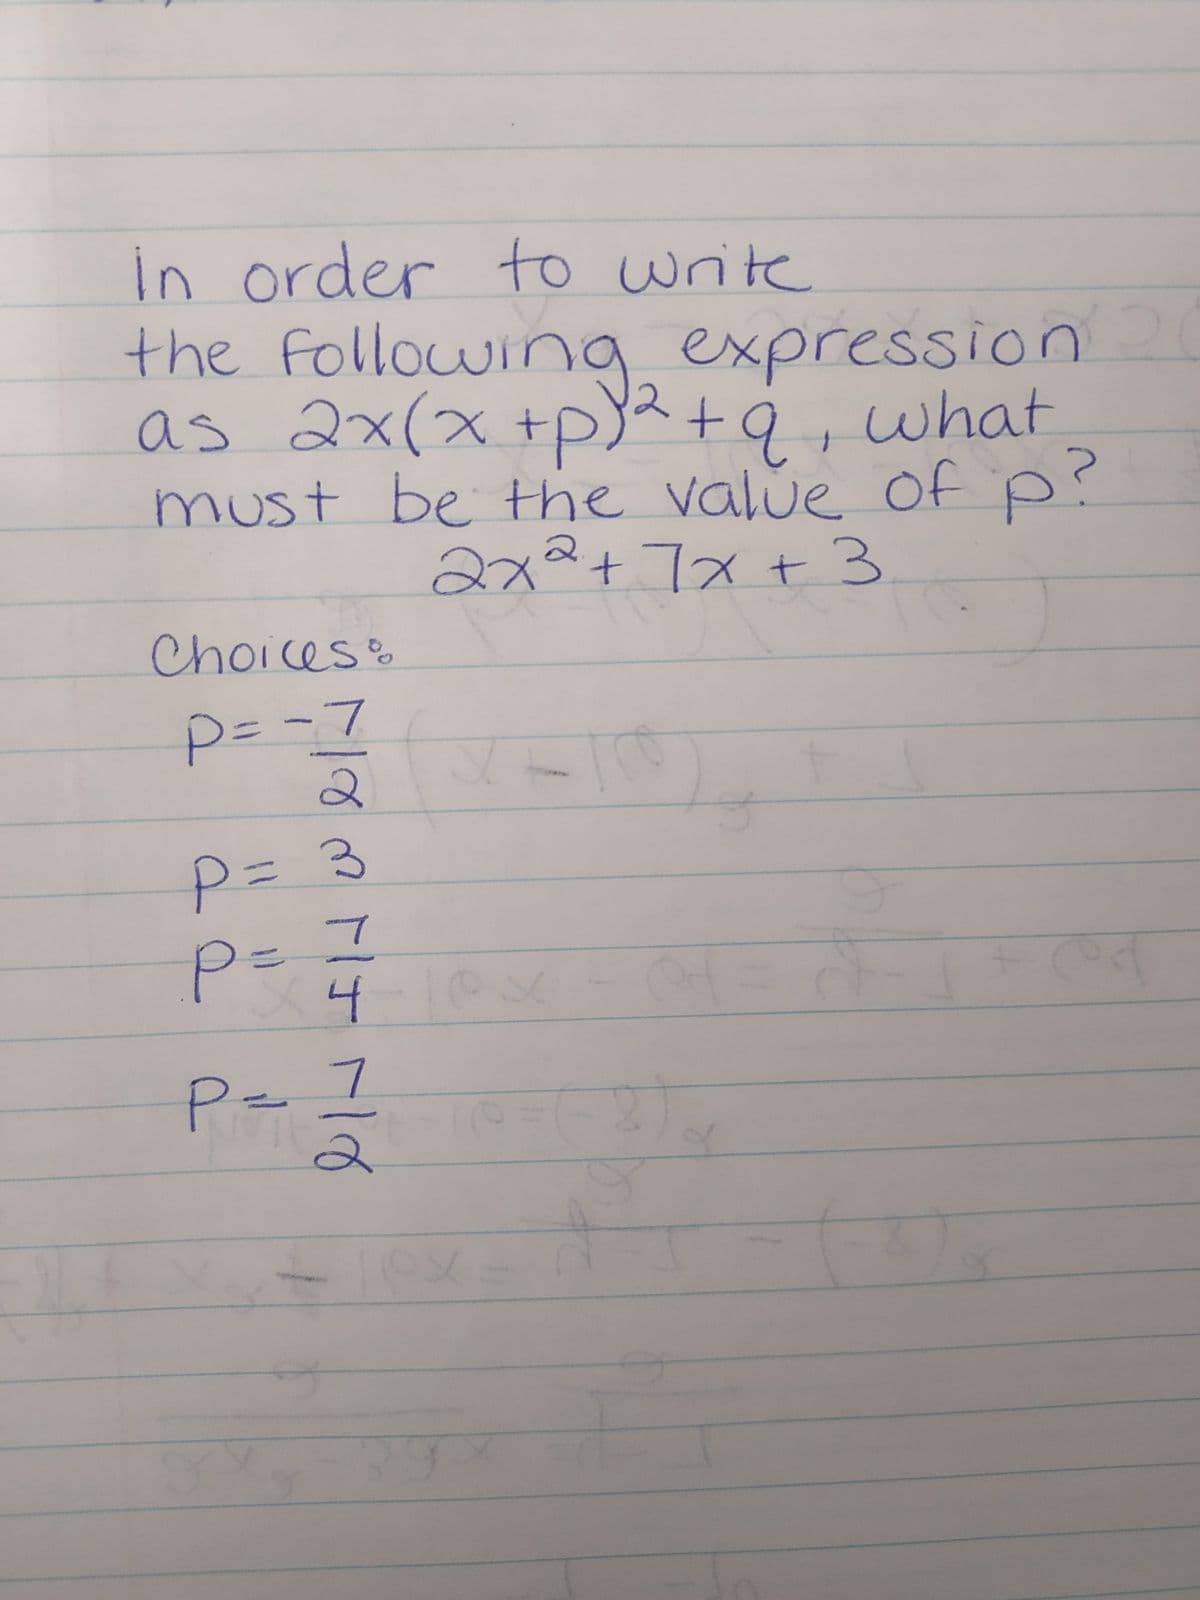 in order to write
the following expression 20
as 2x(x+p)² + 9, what
must be the value of p?
2x² + 7x + 3
Choices &
P= -7
P = 3
P = 7
4 x
7
P
per 1/2
F
ef
5
ed